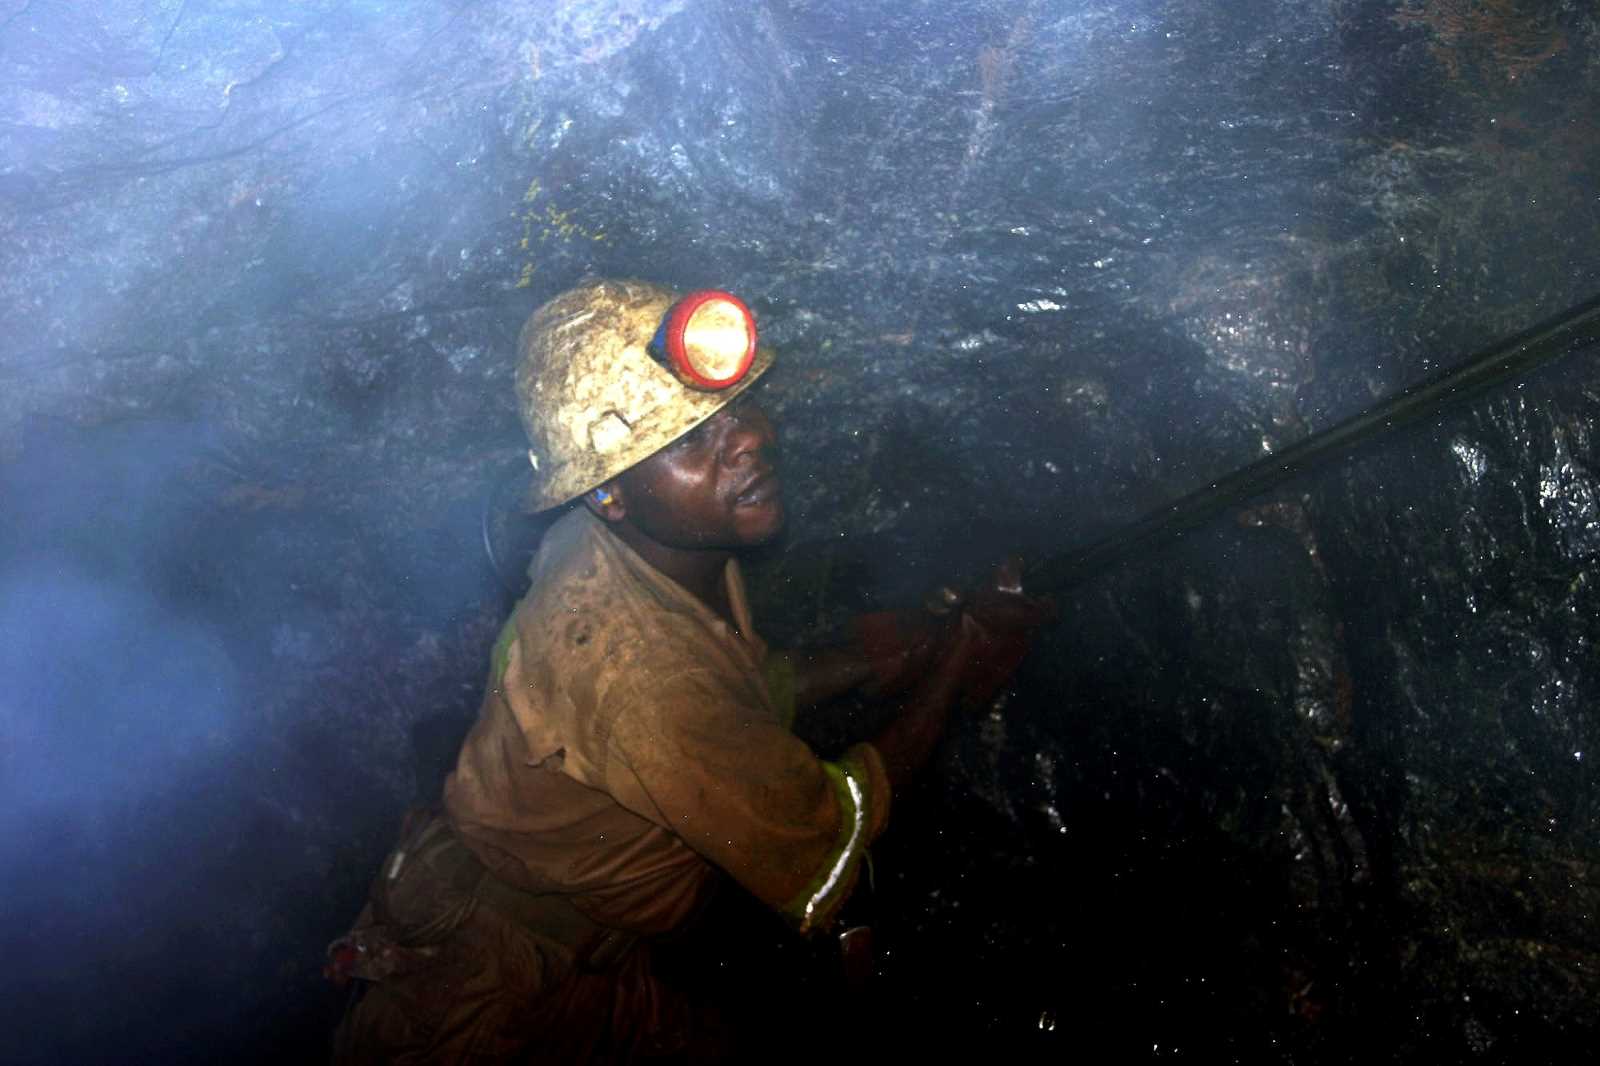 Zambia depends on copper mining.